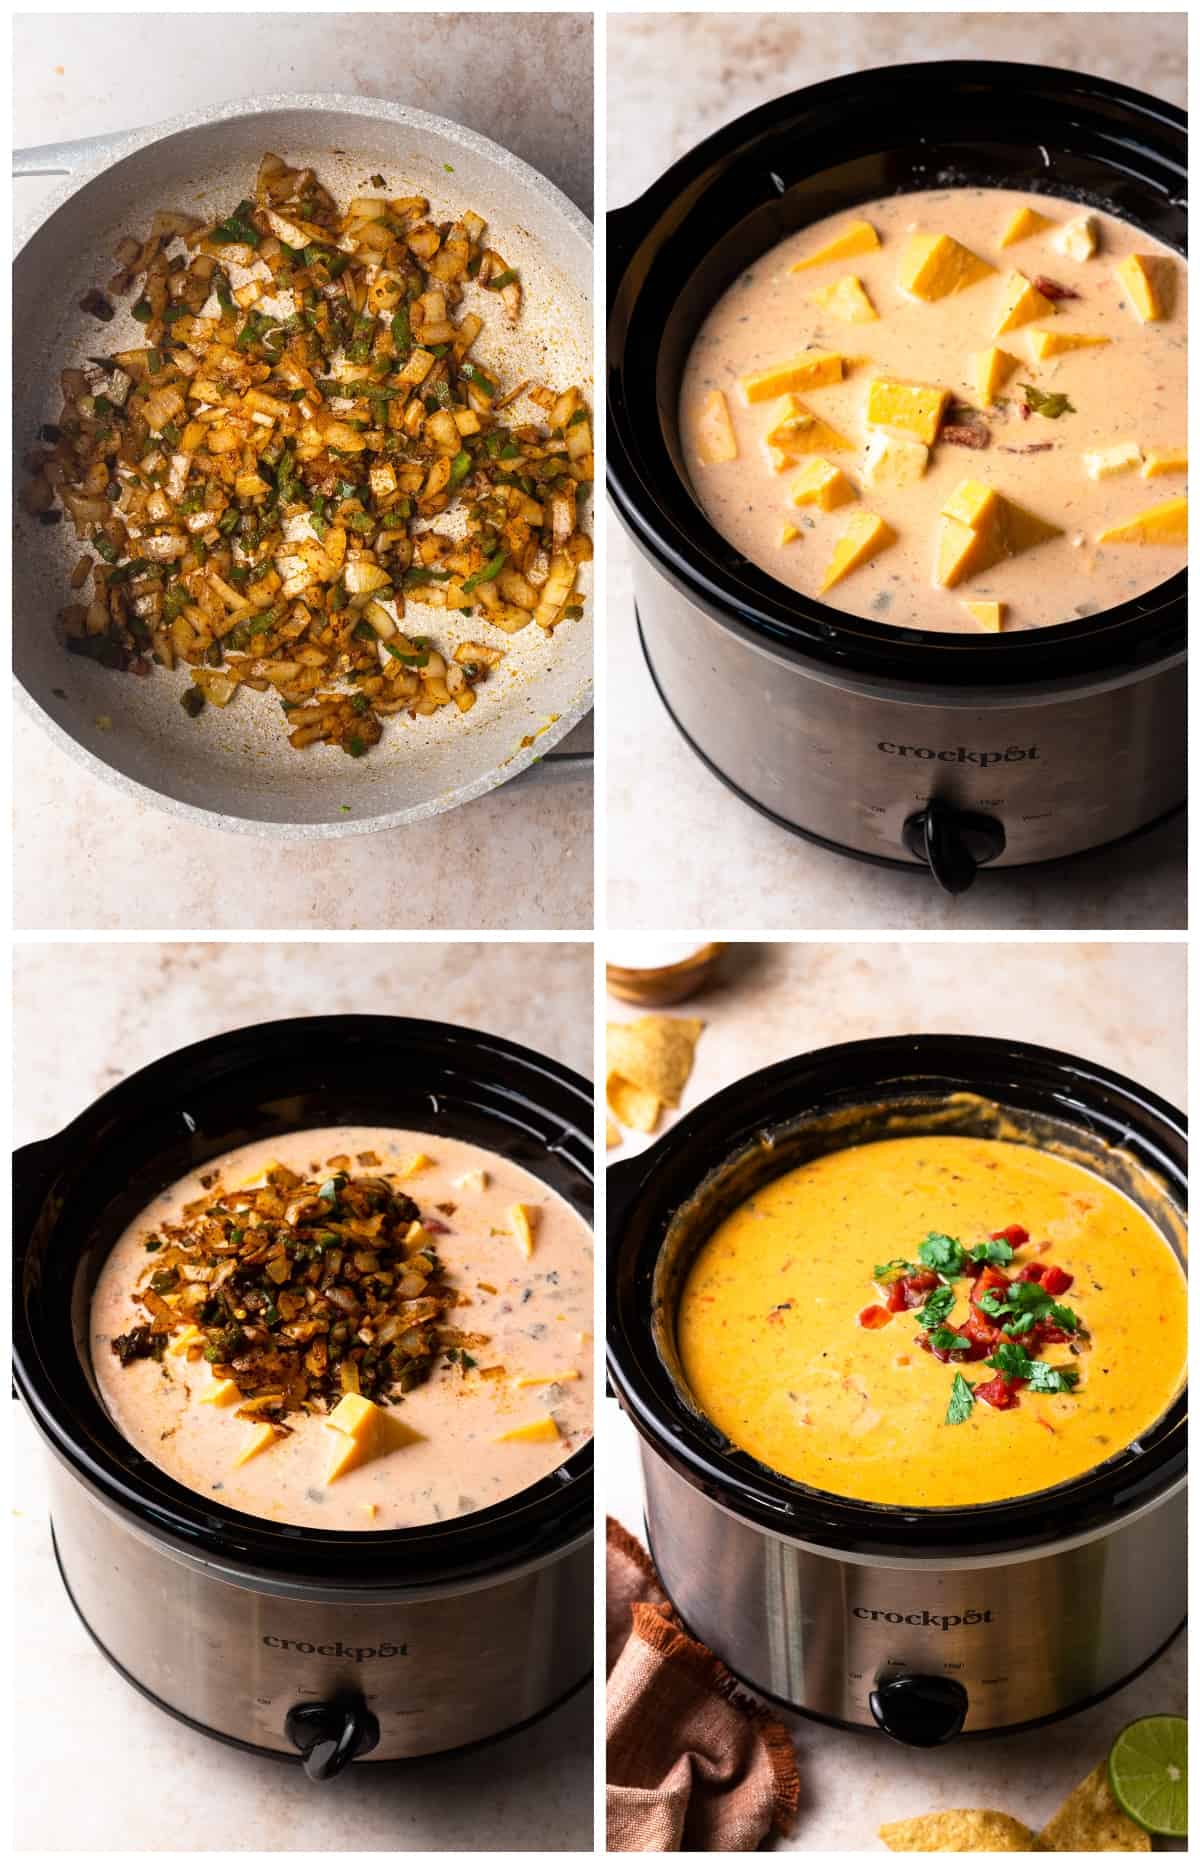 https://www.thecookierookie.com/wp-content/uploads/2019/12/step-by-step-photos-for-how-to-make-crockpot-queso.jpg